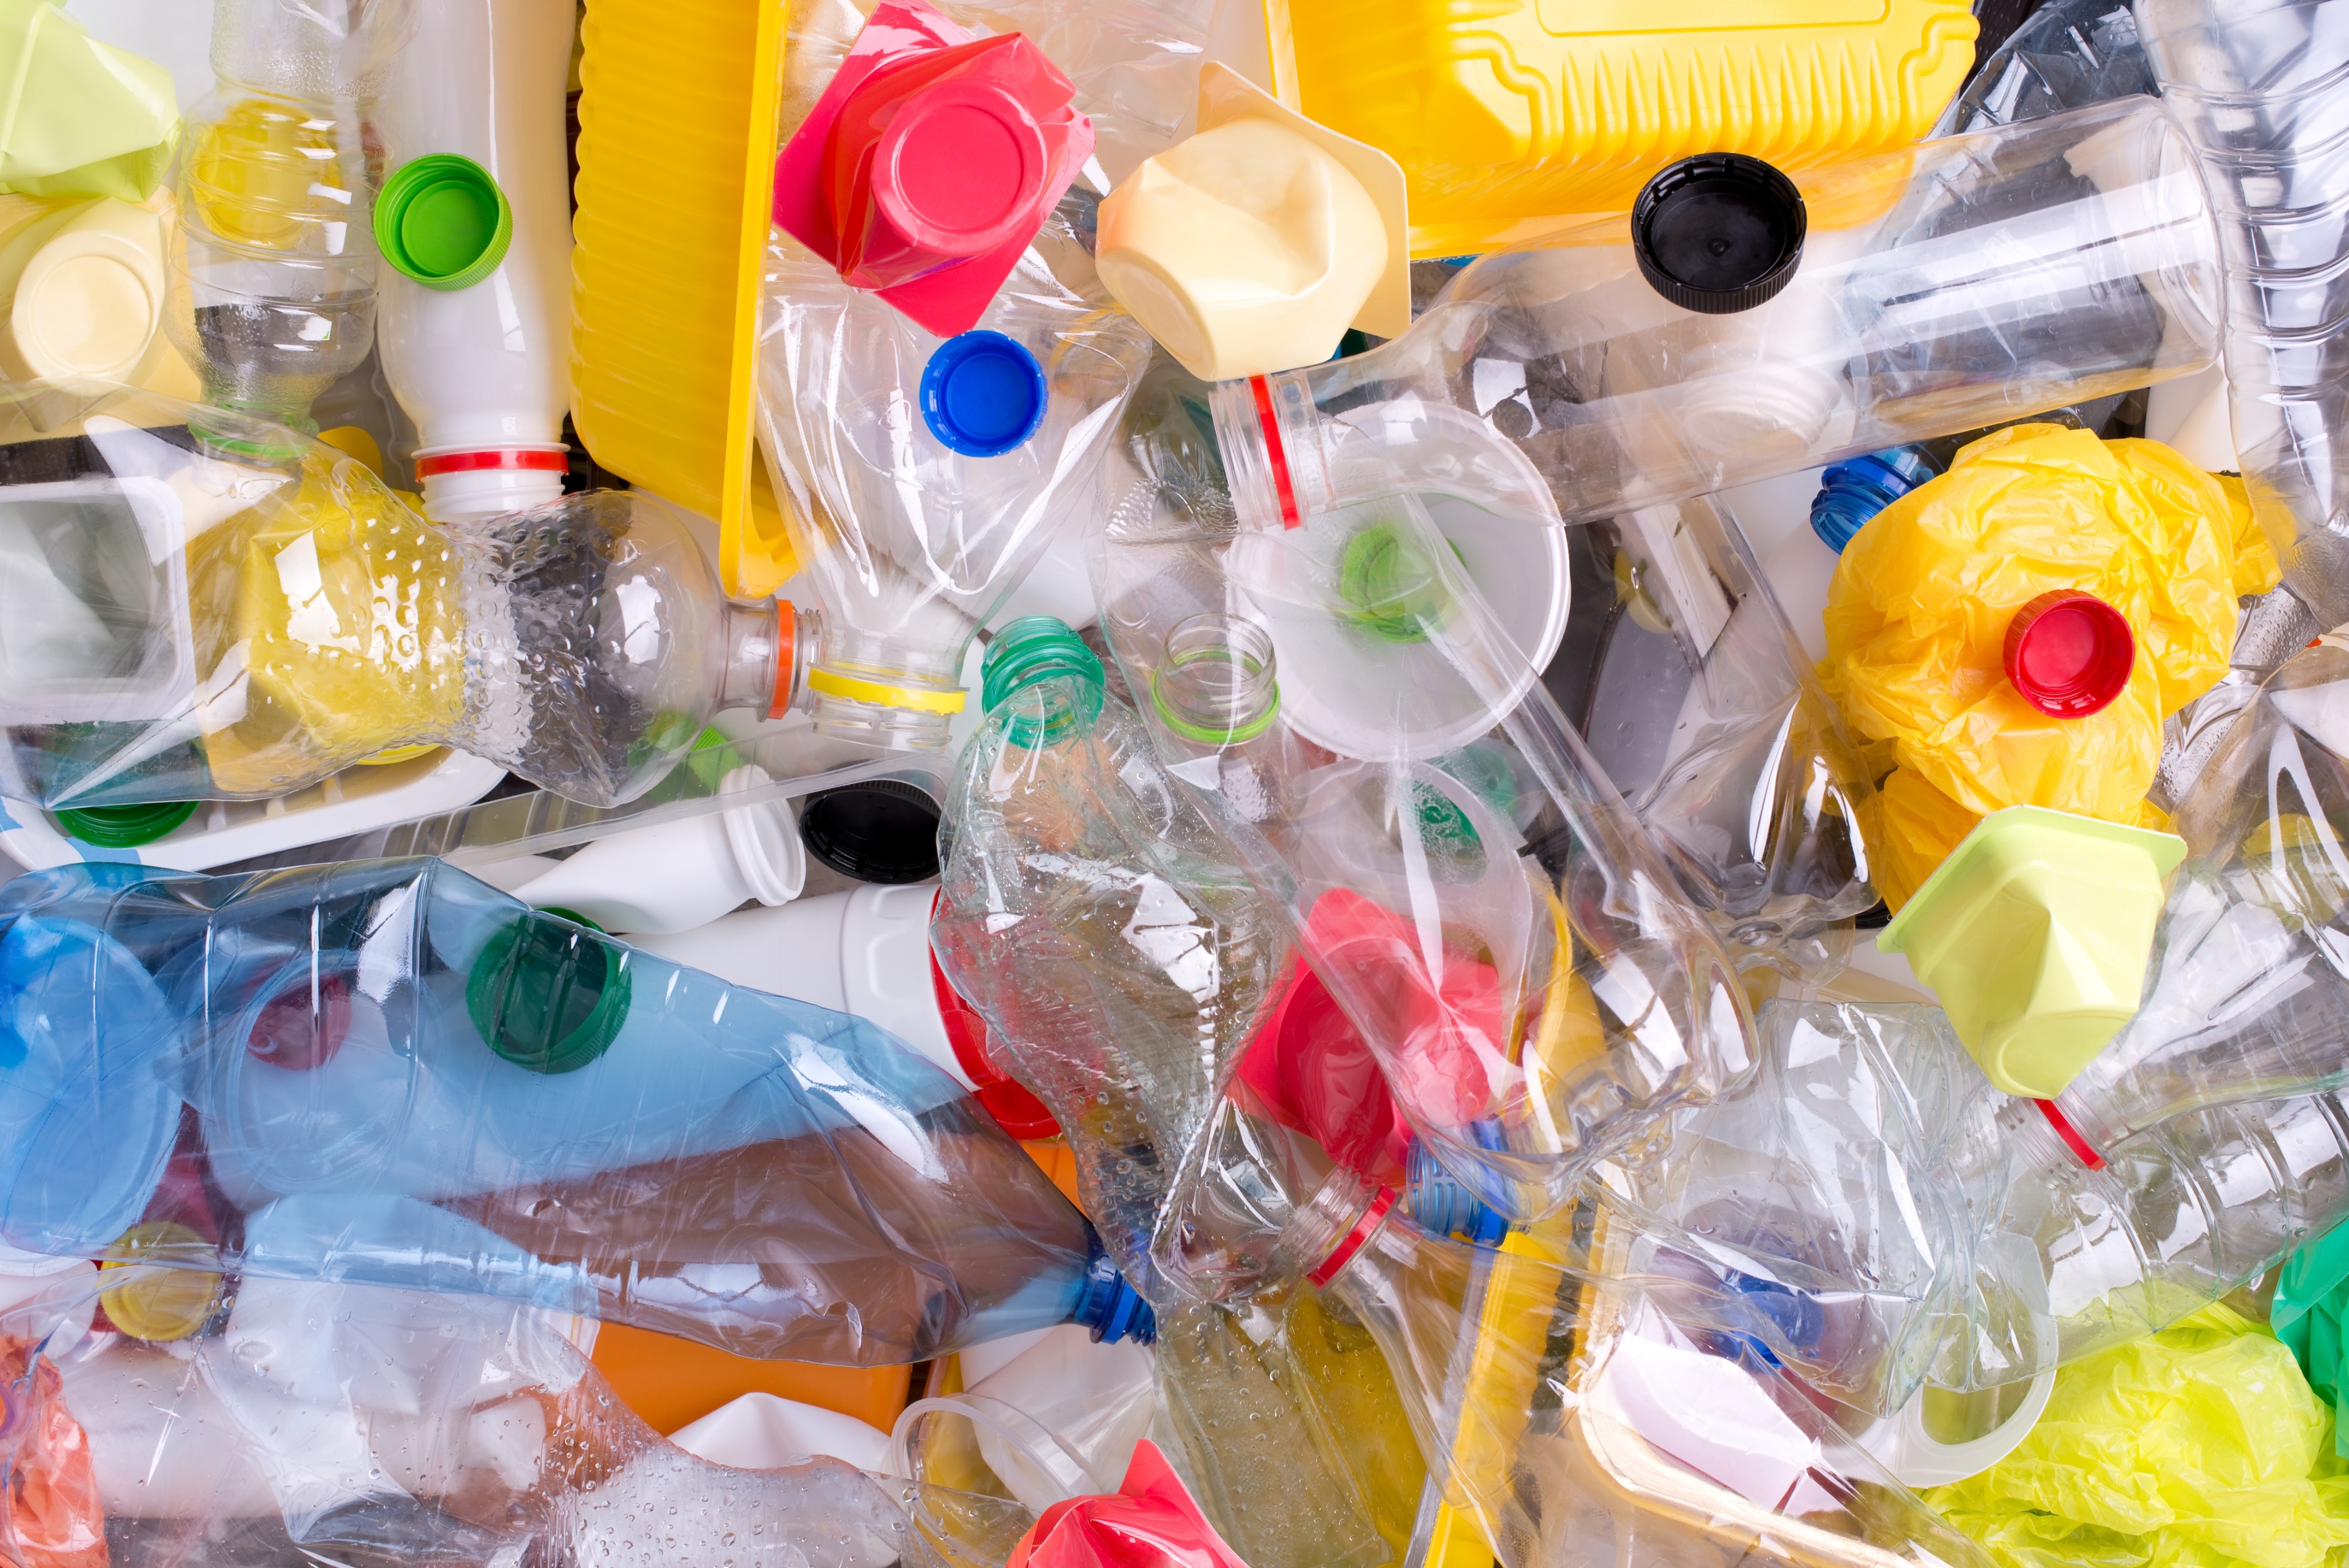 An assortment of plastic waste, including bottles, bags, and containers, is piling up.